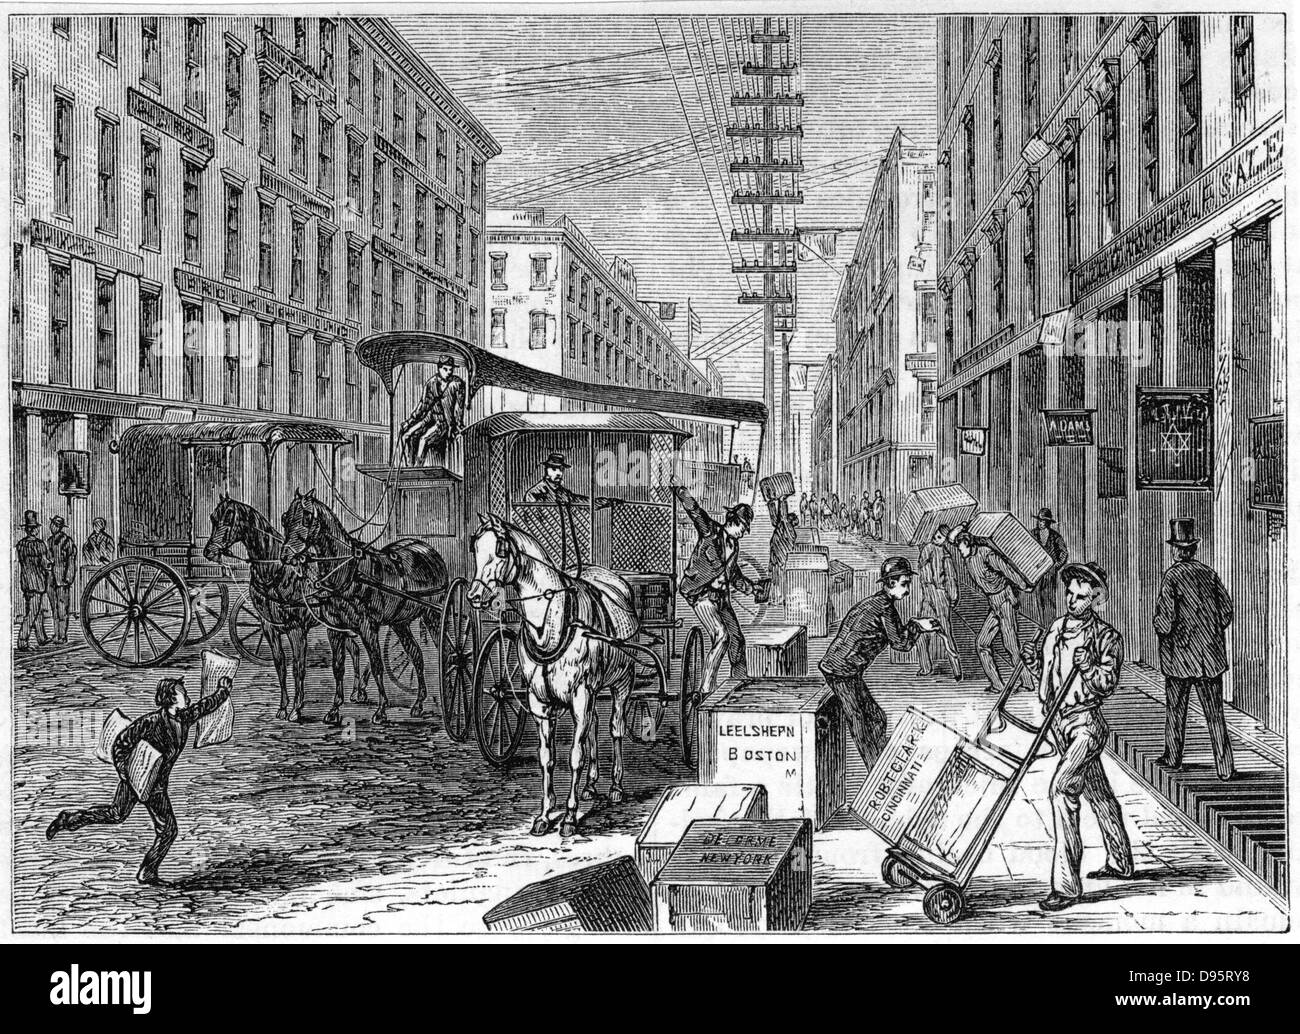 Deliveries and collections taking place at Wells Fargo depot, New York.  From 'Harper's New Monthly Magazine' New York 1875. Wood engraving Stock Photo